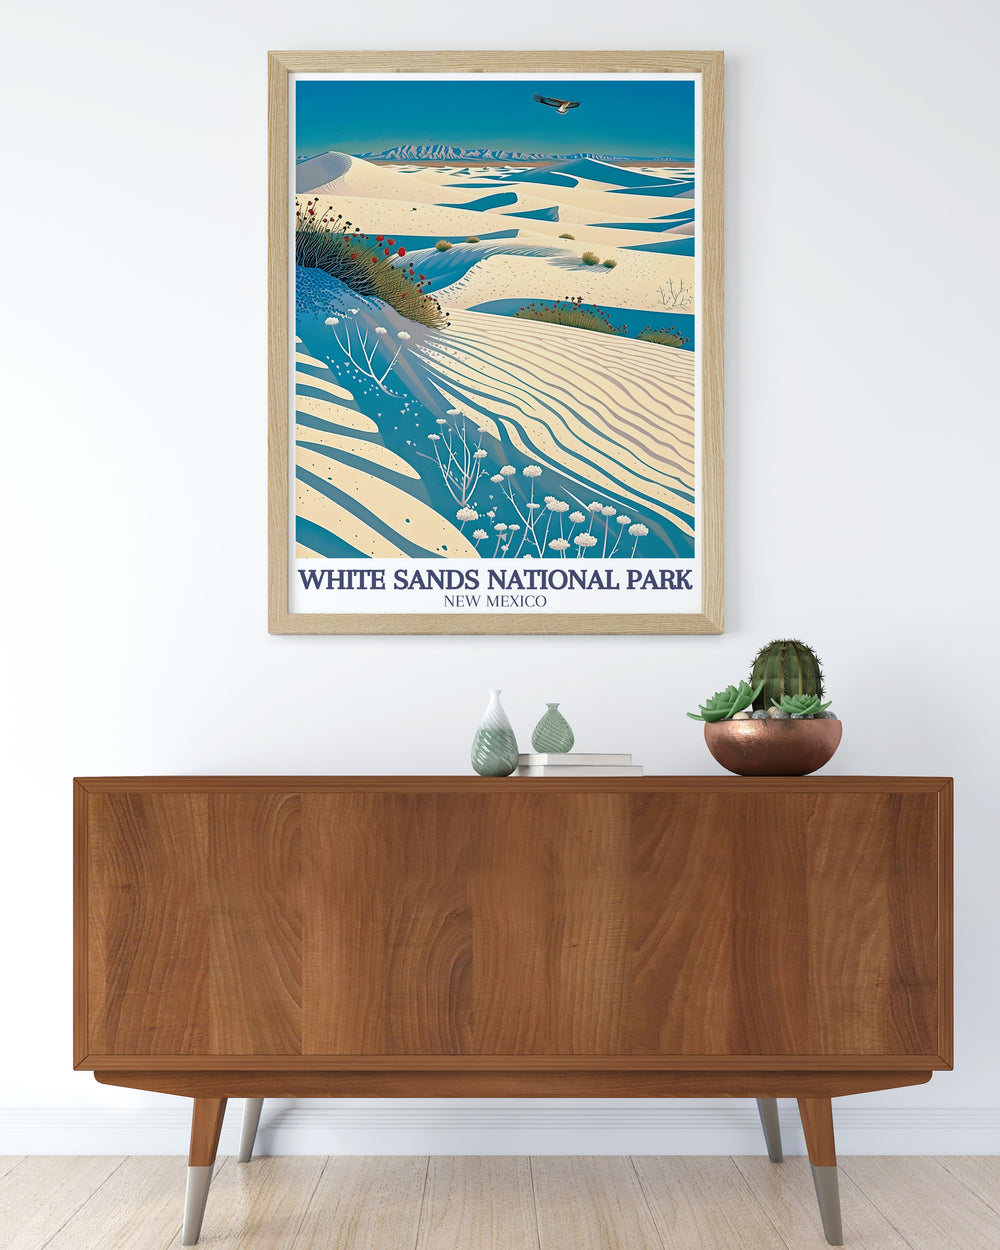 Elegant White Sands decor showcasing the majestic Sacramento Mountains and the beautiful Chihuahuan Desert a perfect addition to any living room decor modern art that captures the tranquil landscapes of White Sands National Park for a serene home environment.